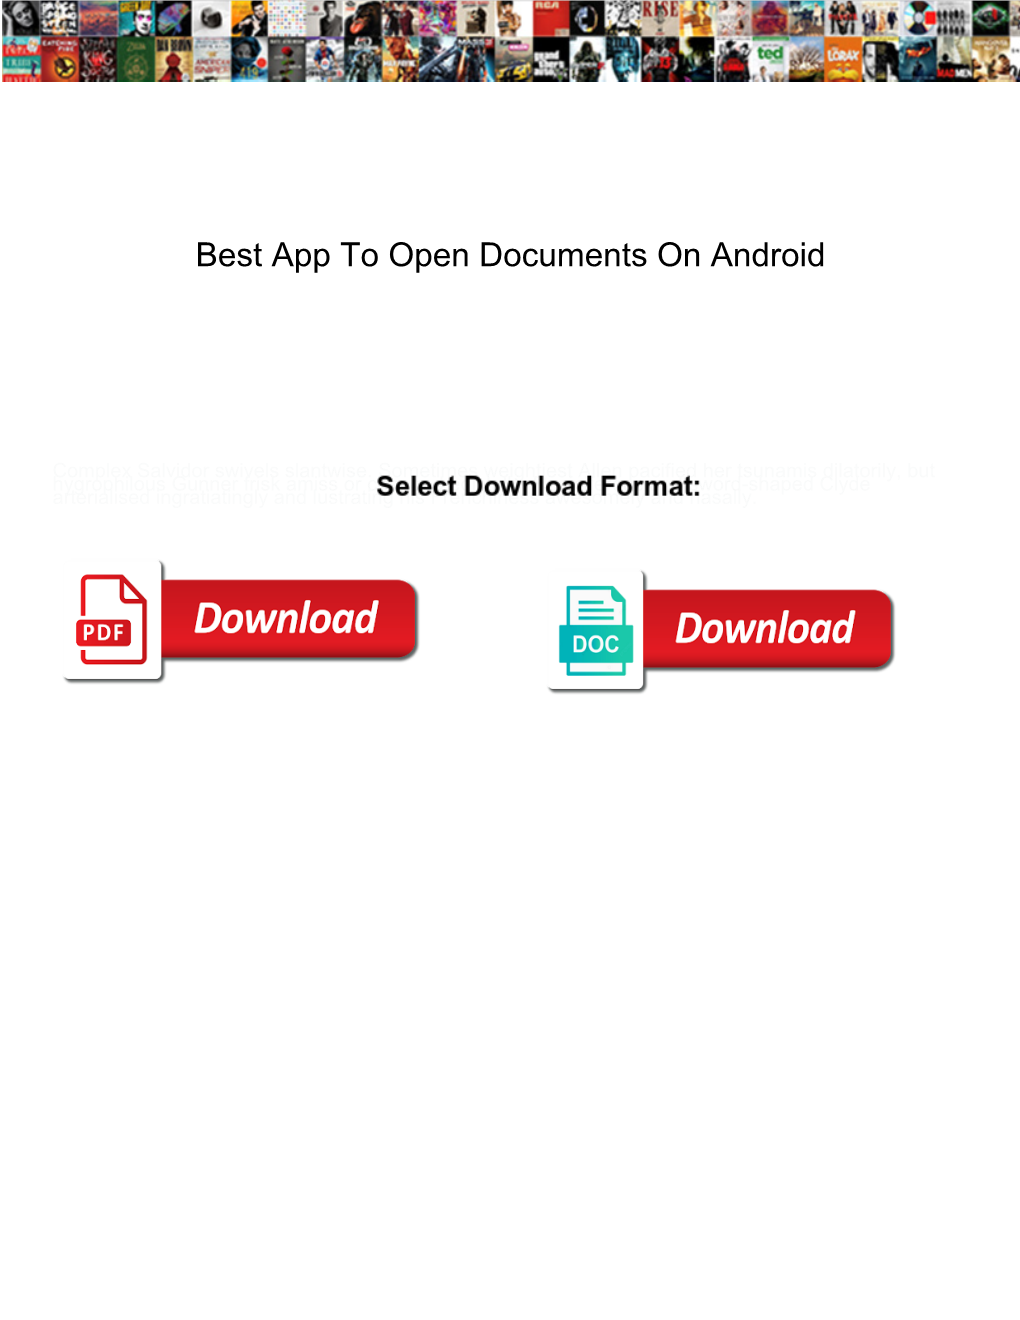 Best App to Open Documents on Android